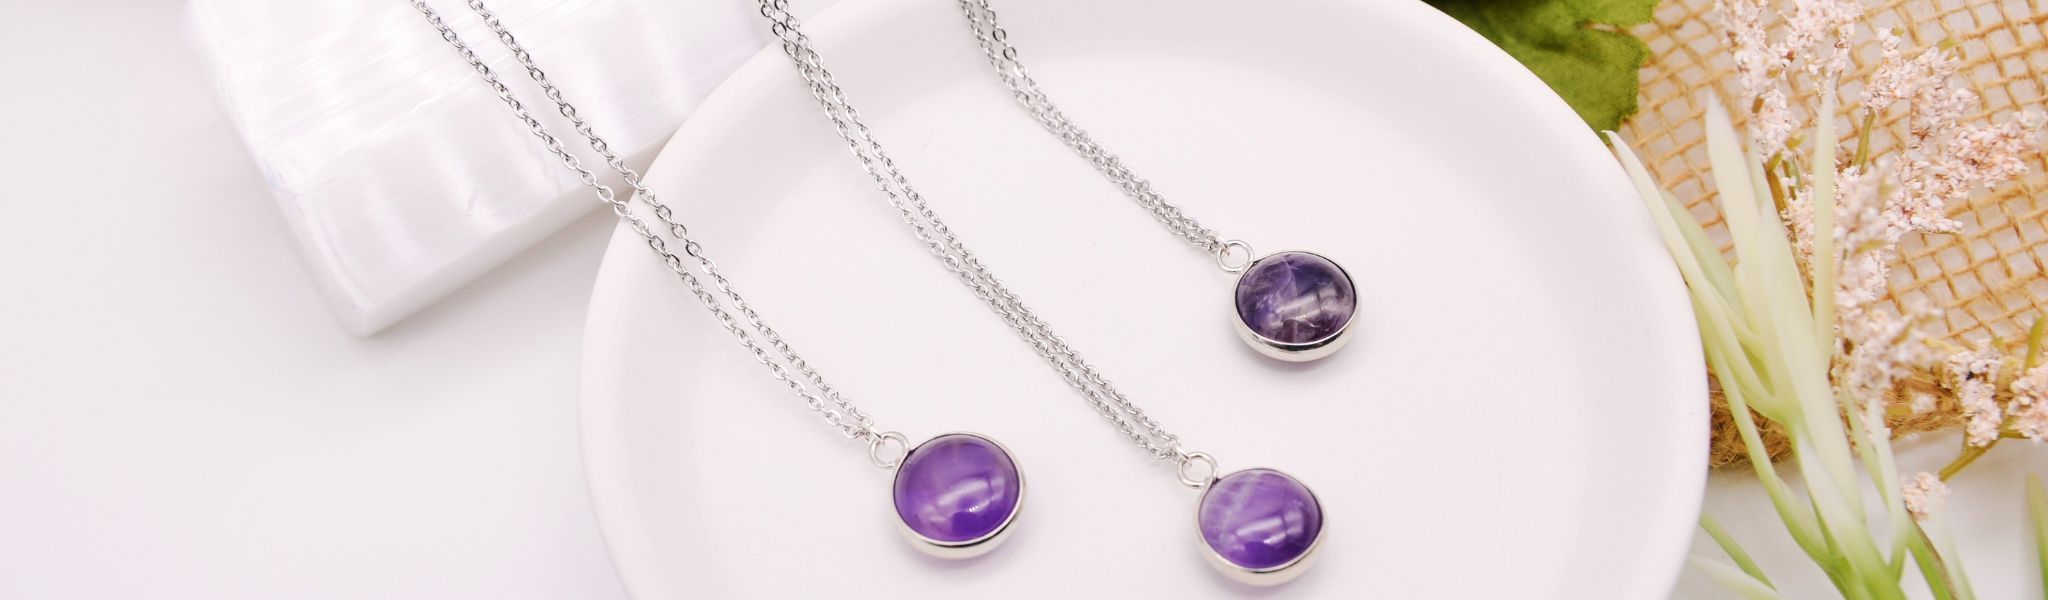 Amethyst gemstone jewelry, necklace for the month of February, love, and healing | Emerald Sun Creations